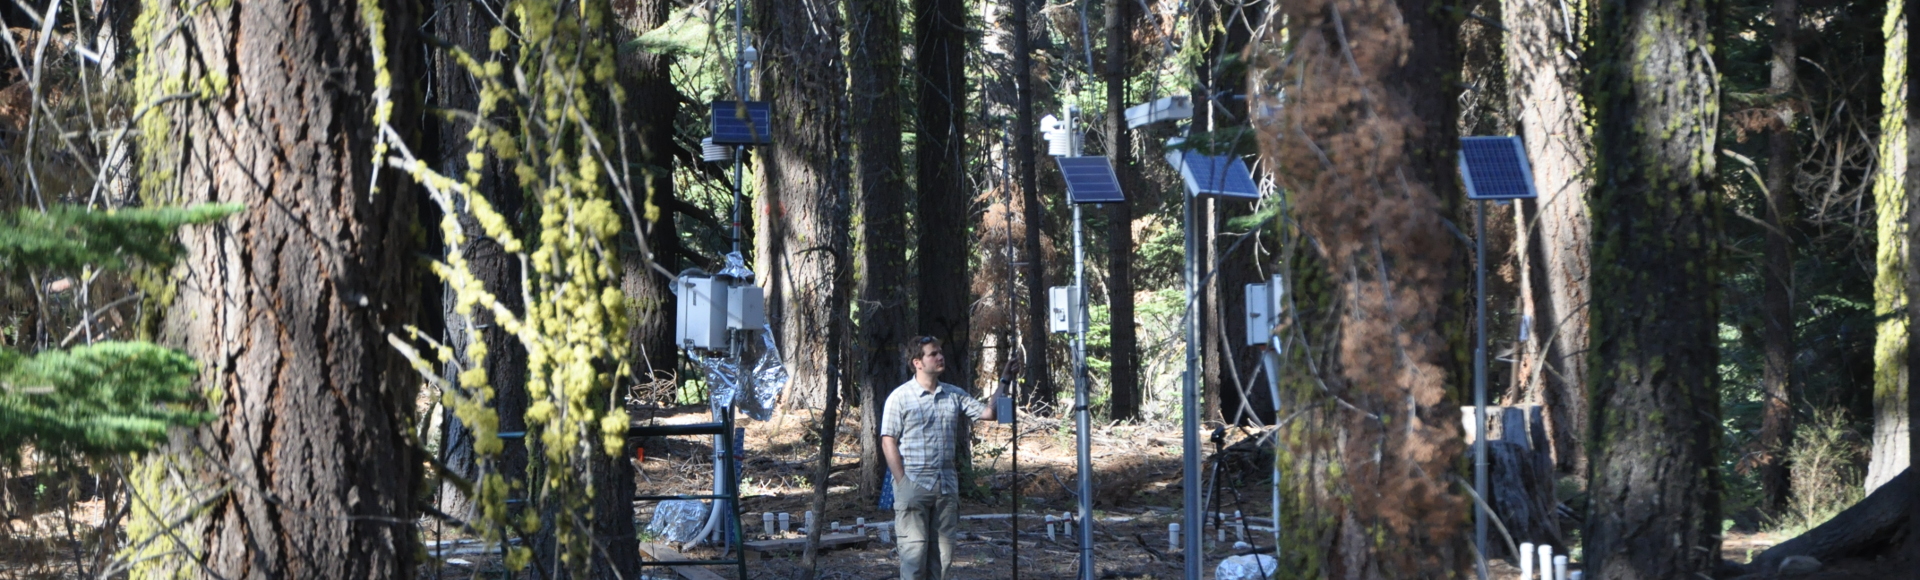 Deployment in the Southern Sierra, California